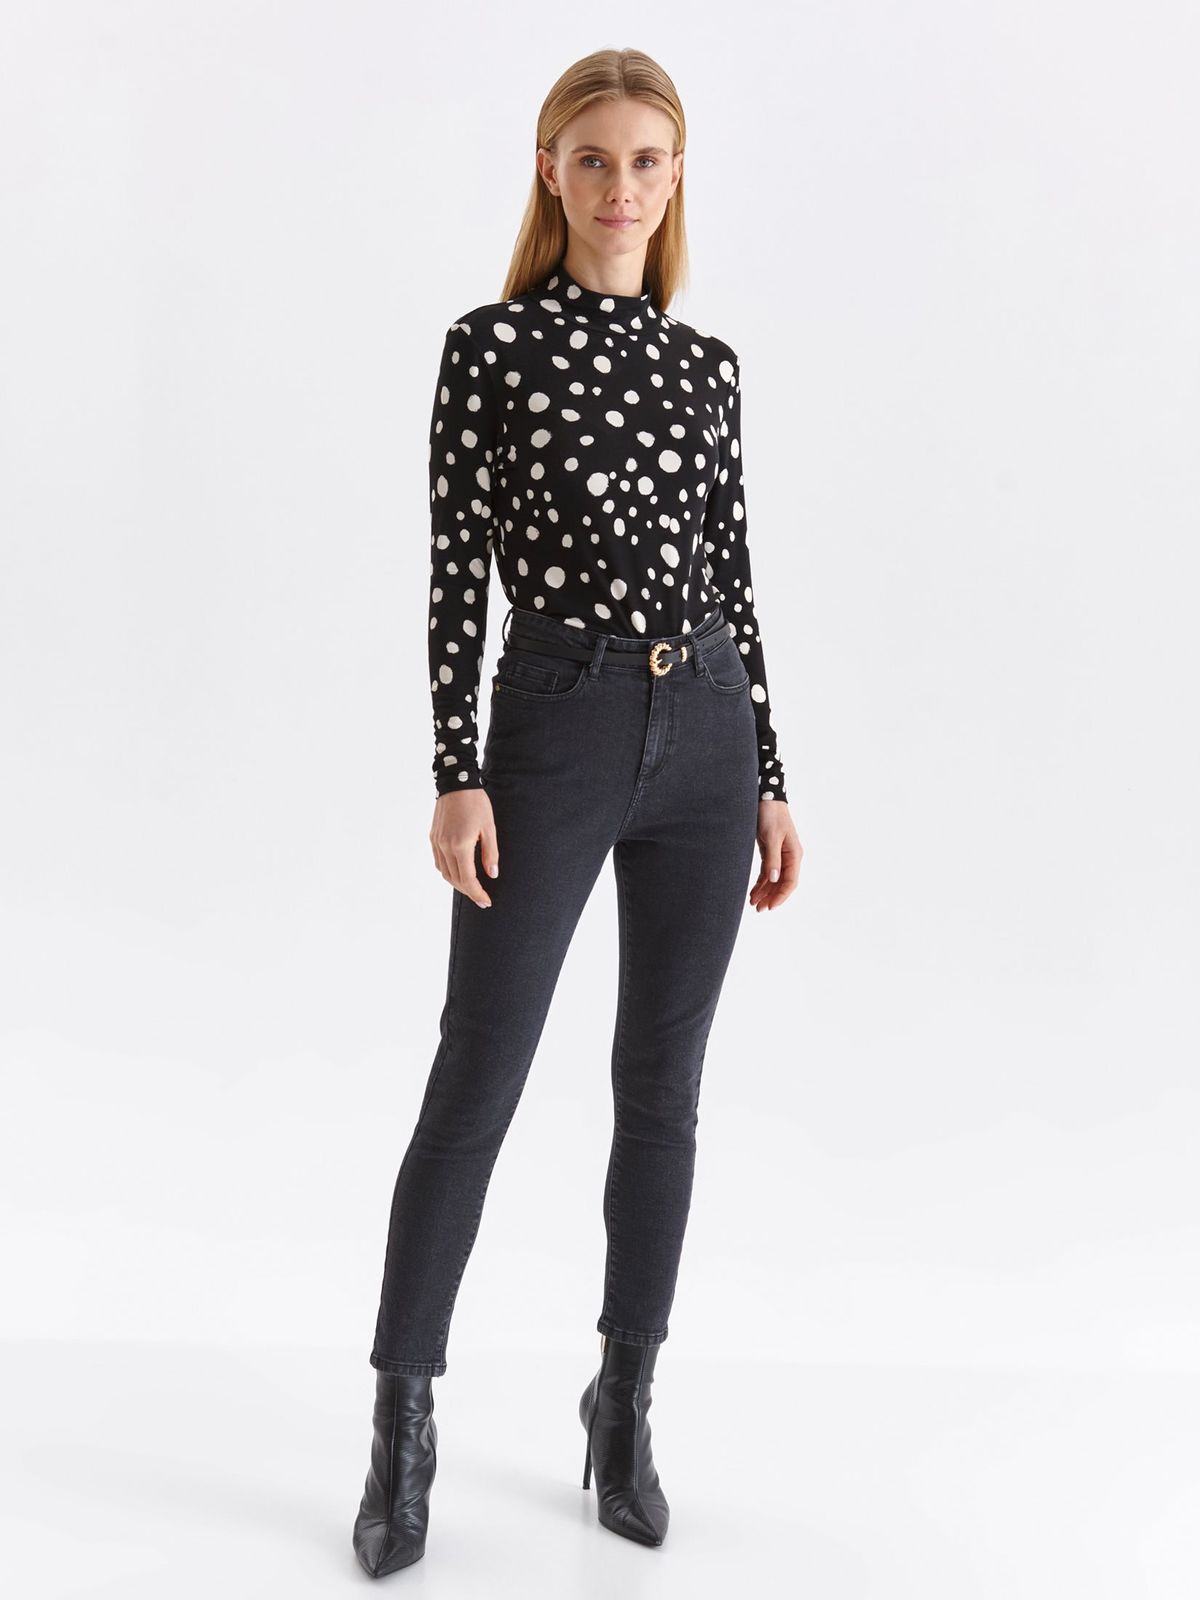 Black trousers denim long conical high waisted